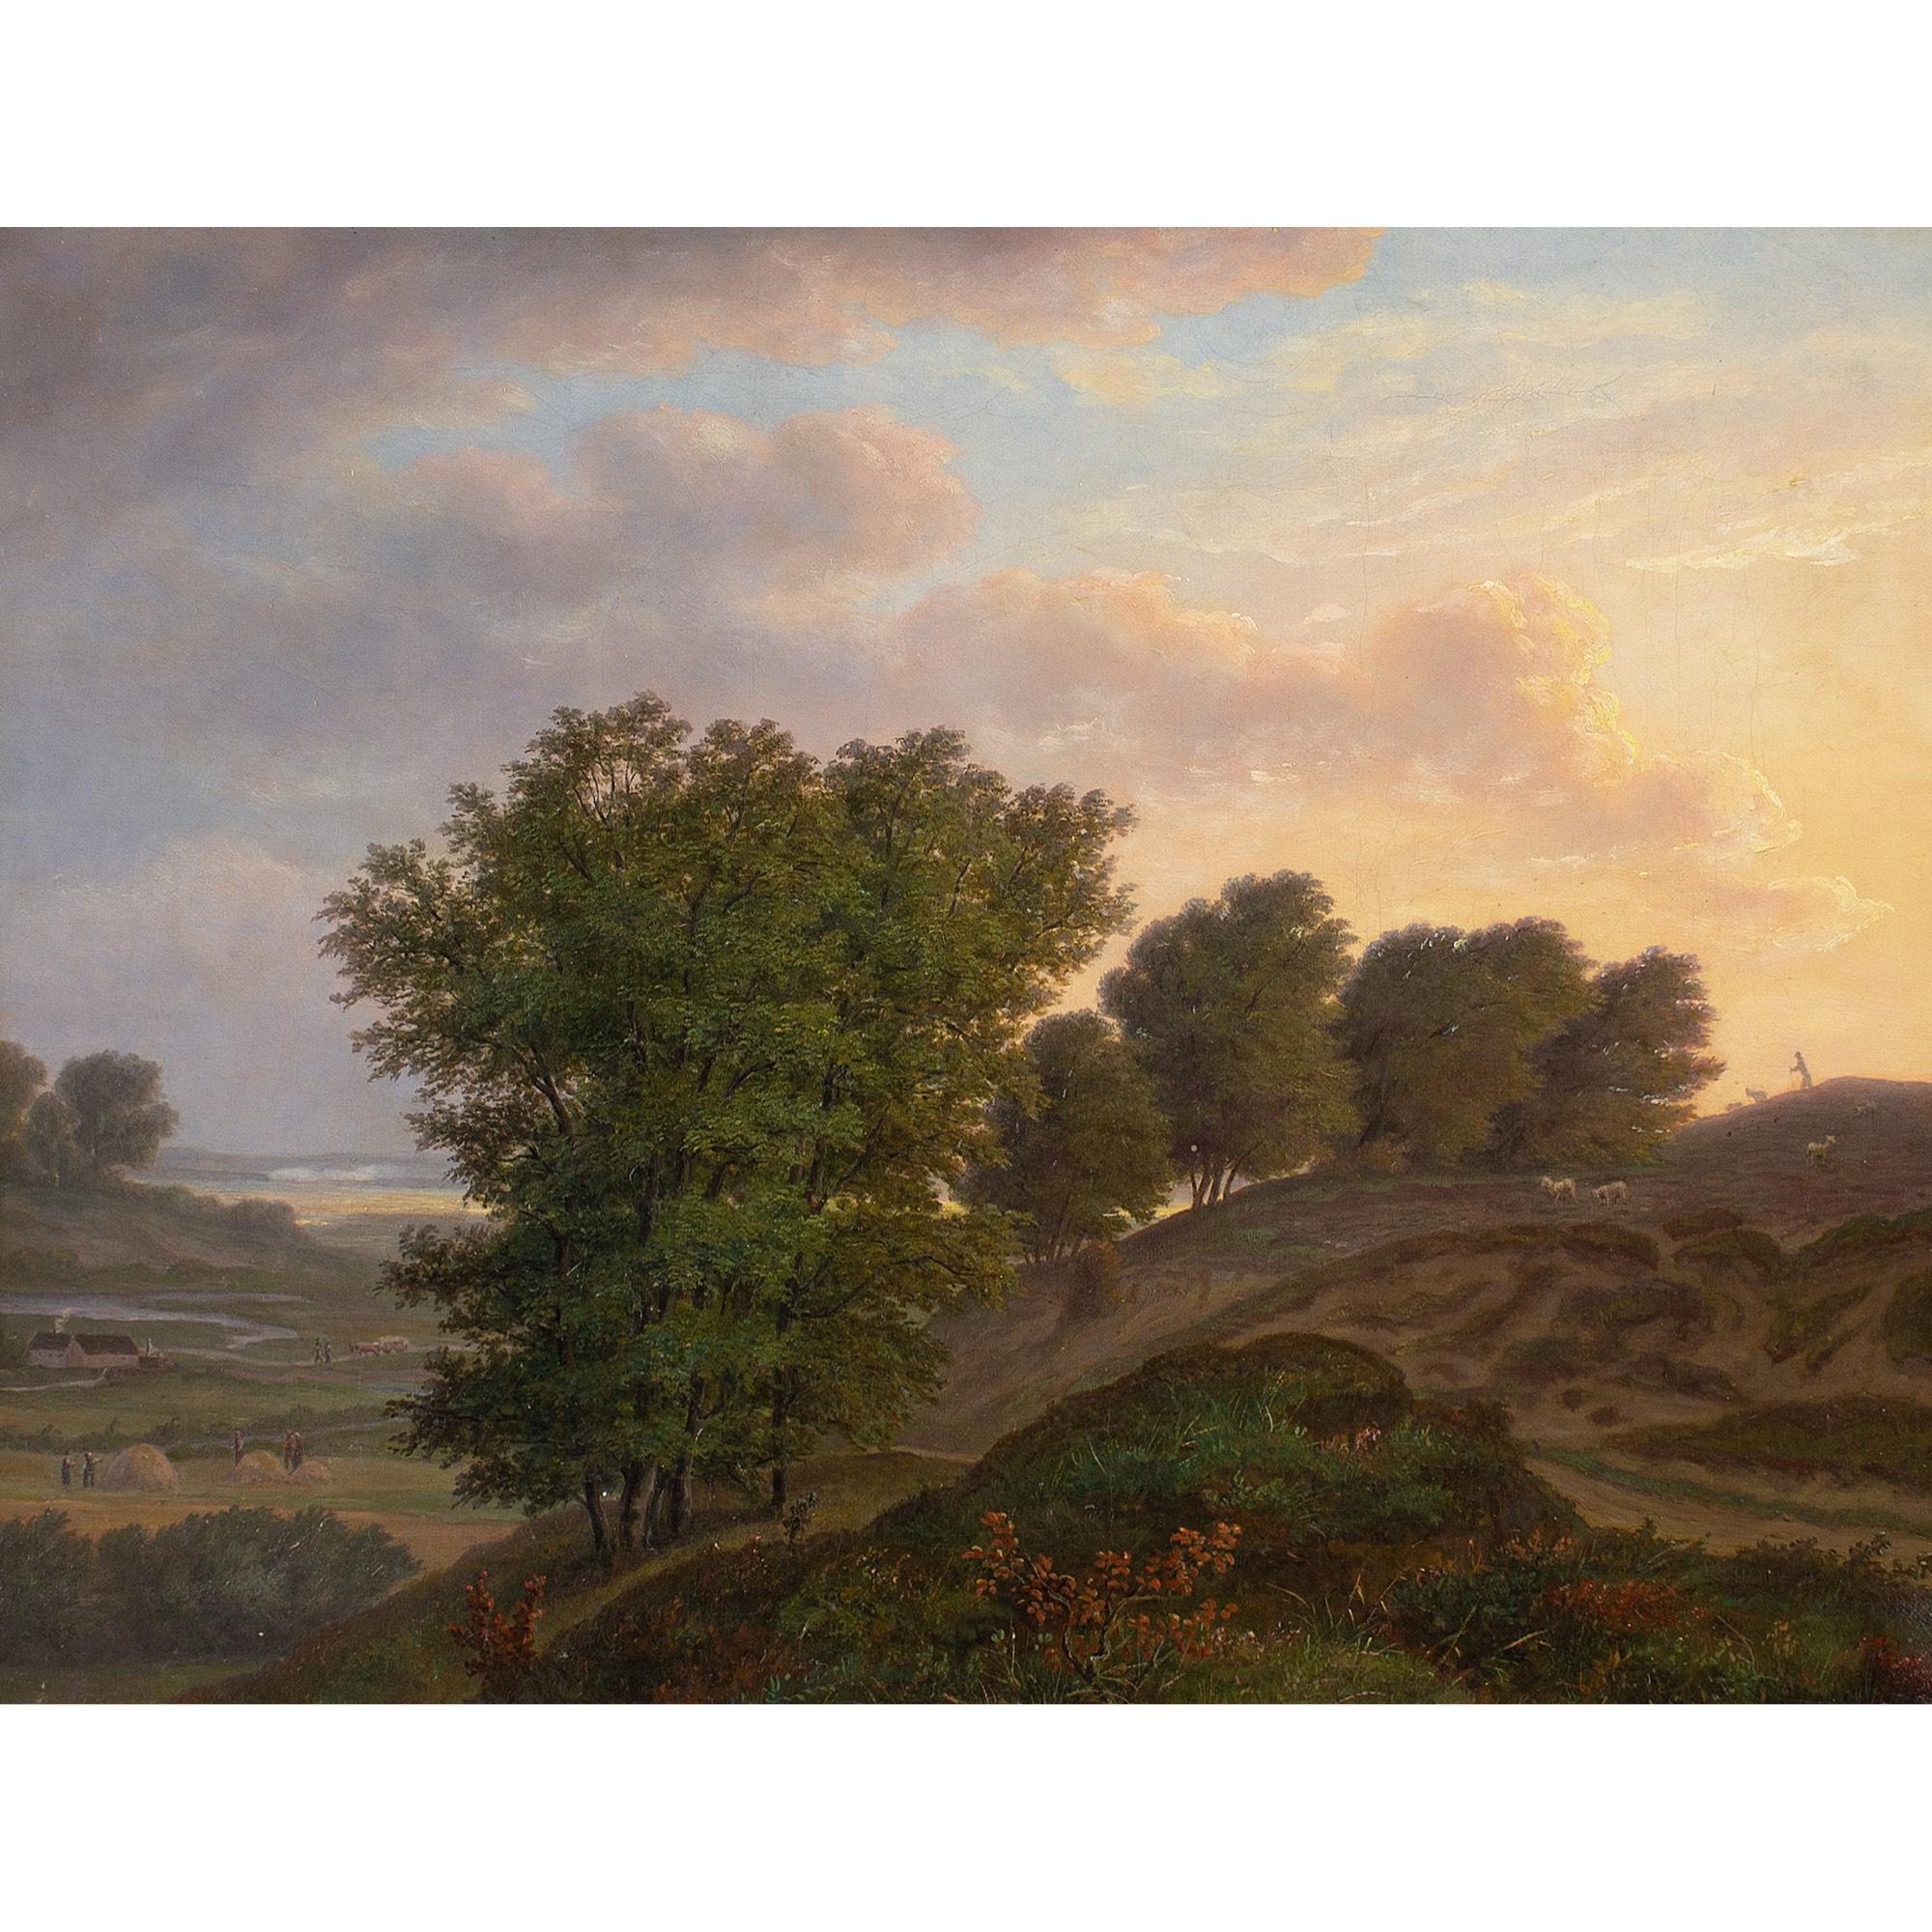 This charming late 19th-century Danish oil painting depicts a picturesque rural view with a farm, wandering shepherd and trees.

Akin to a classical vision of pastoral bliss, this majestic landscape celebrates the sublimity of the natural world.